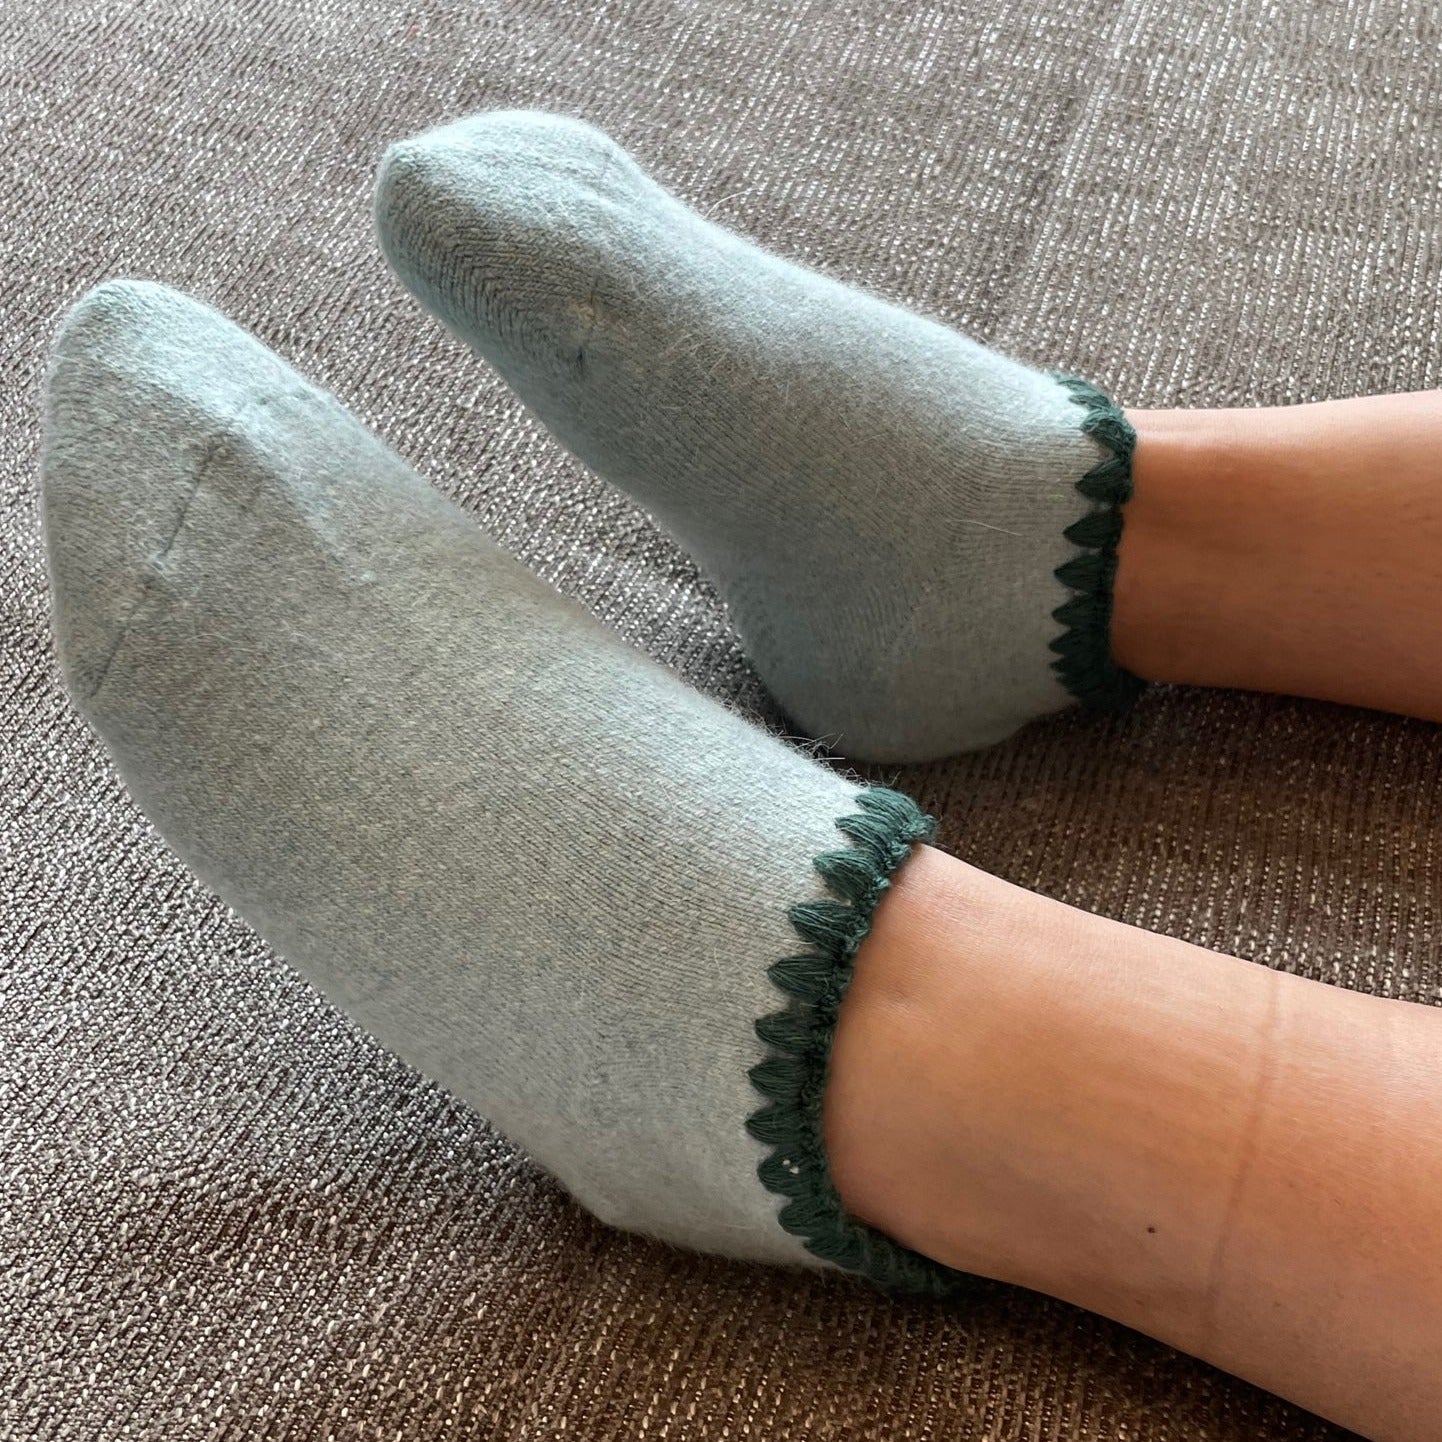 CHERRYSTONE® Slipper Socks | Angora and Wool Blend with Grips | Size Large | Aqua with Green Crocheted Trim | - CHERRYSTONEstyle